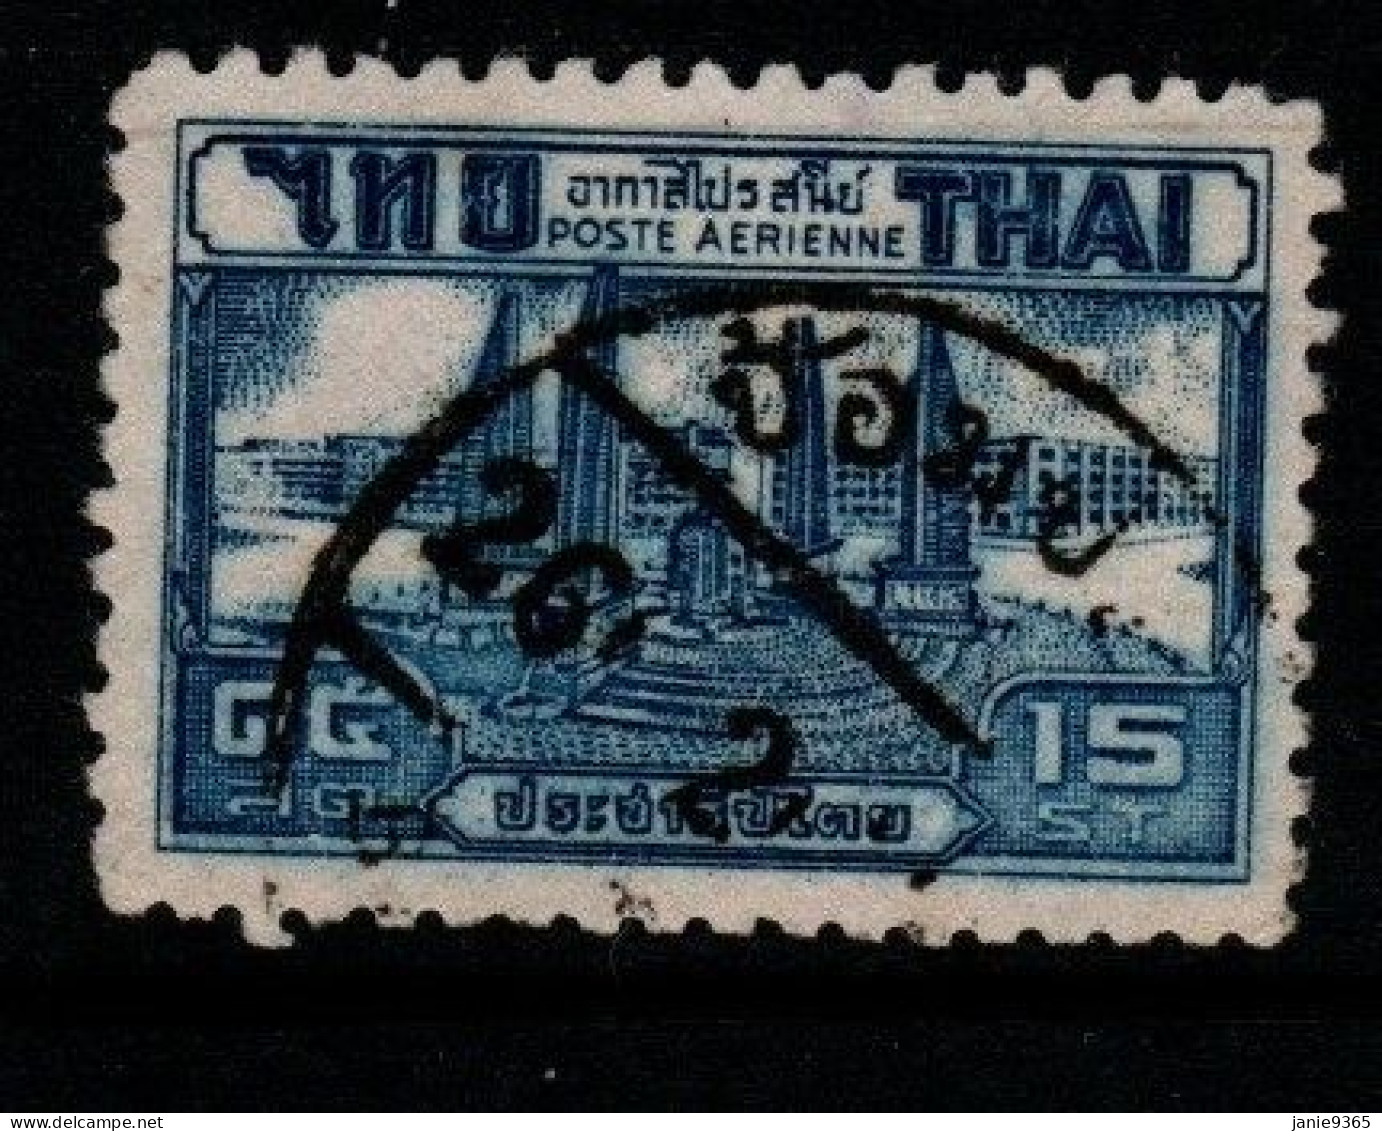 Thailand Cat 306  1942 Air Mail 3rd Issue, 15 Sat Blue,used - Thailand